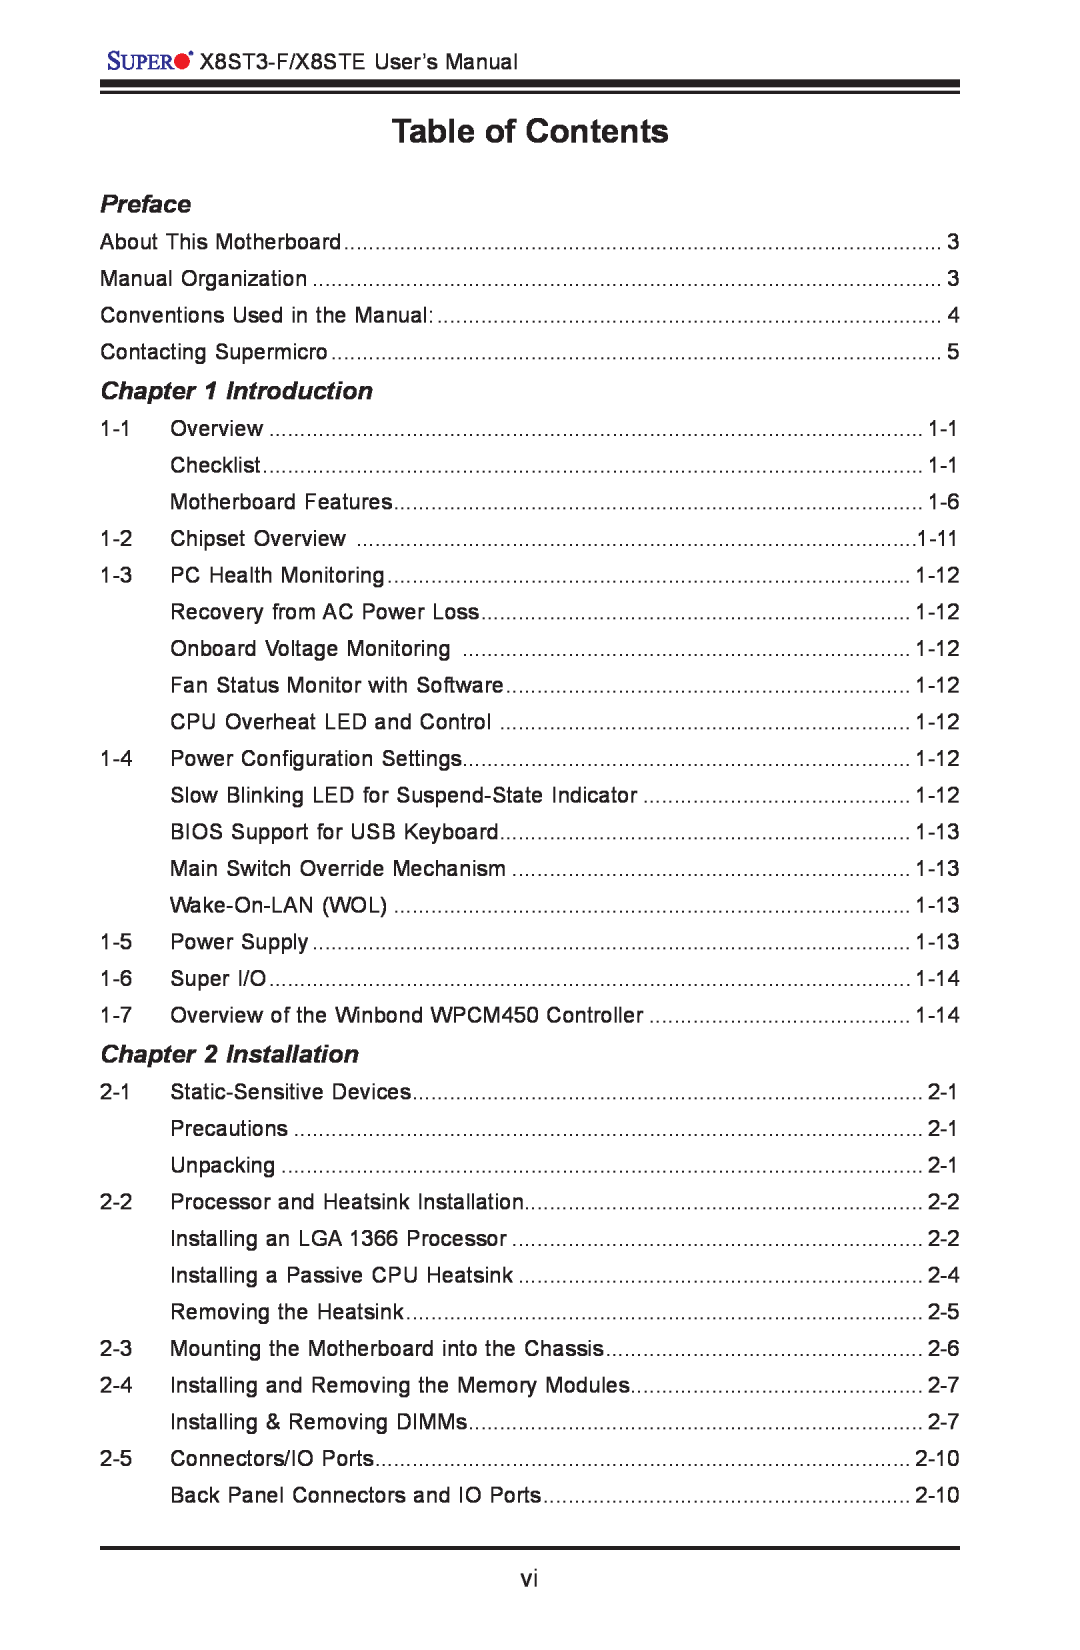 SUPER MICRO Computer X8ST3-F, X8STE user manual Table of Contents, Preface, Introduction, Installation 